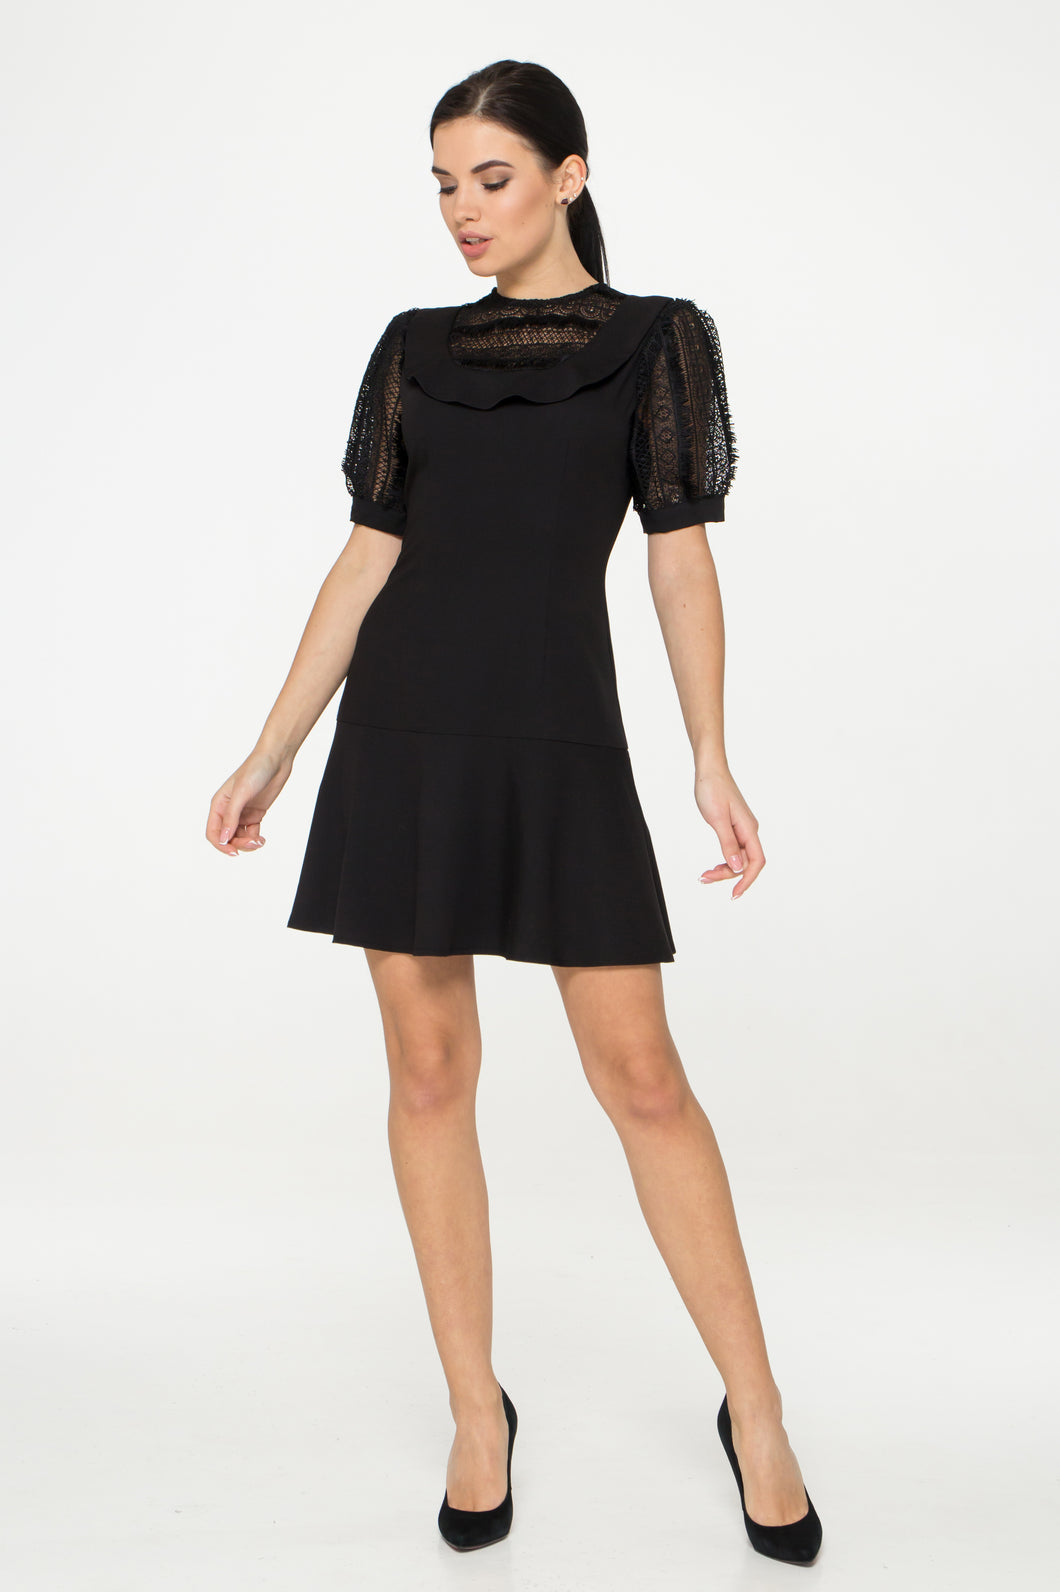 Black cocktail dress with lace puffy sleeves